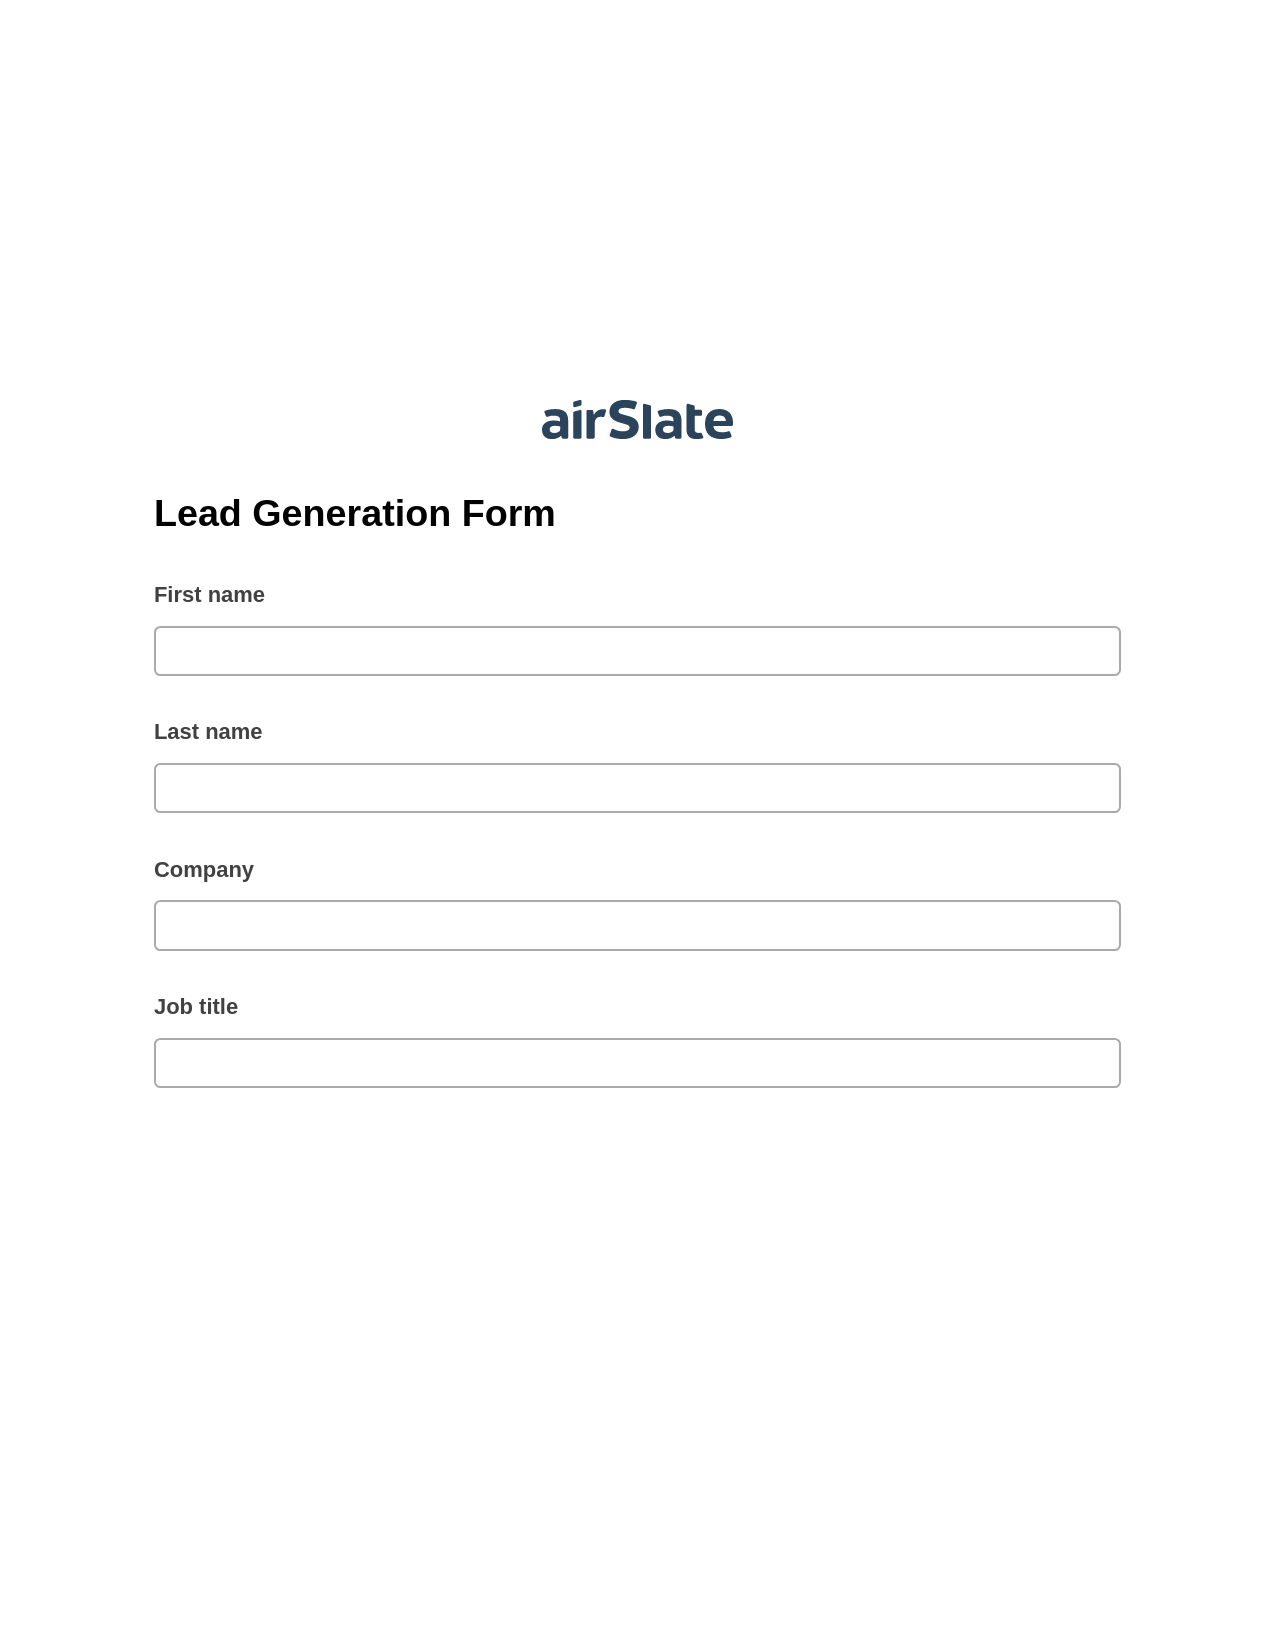 Lead Generation Form Prefill from NetSuite records, Add Tags to Slate Bot, Archive to Google Drive Bot